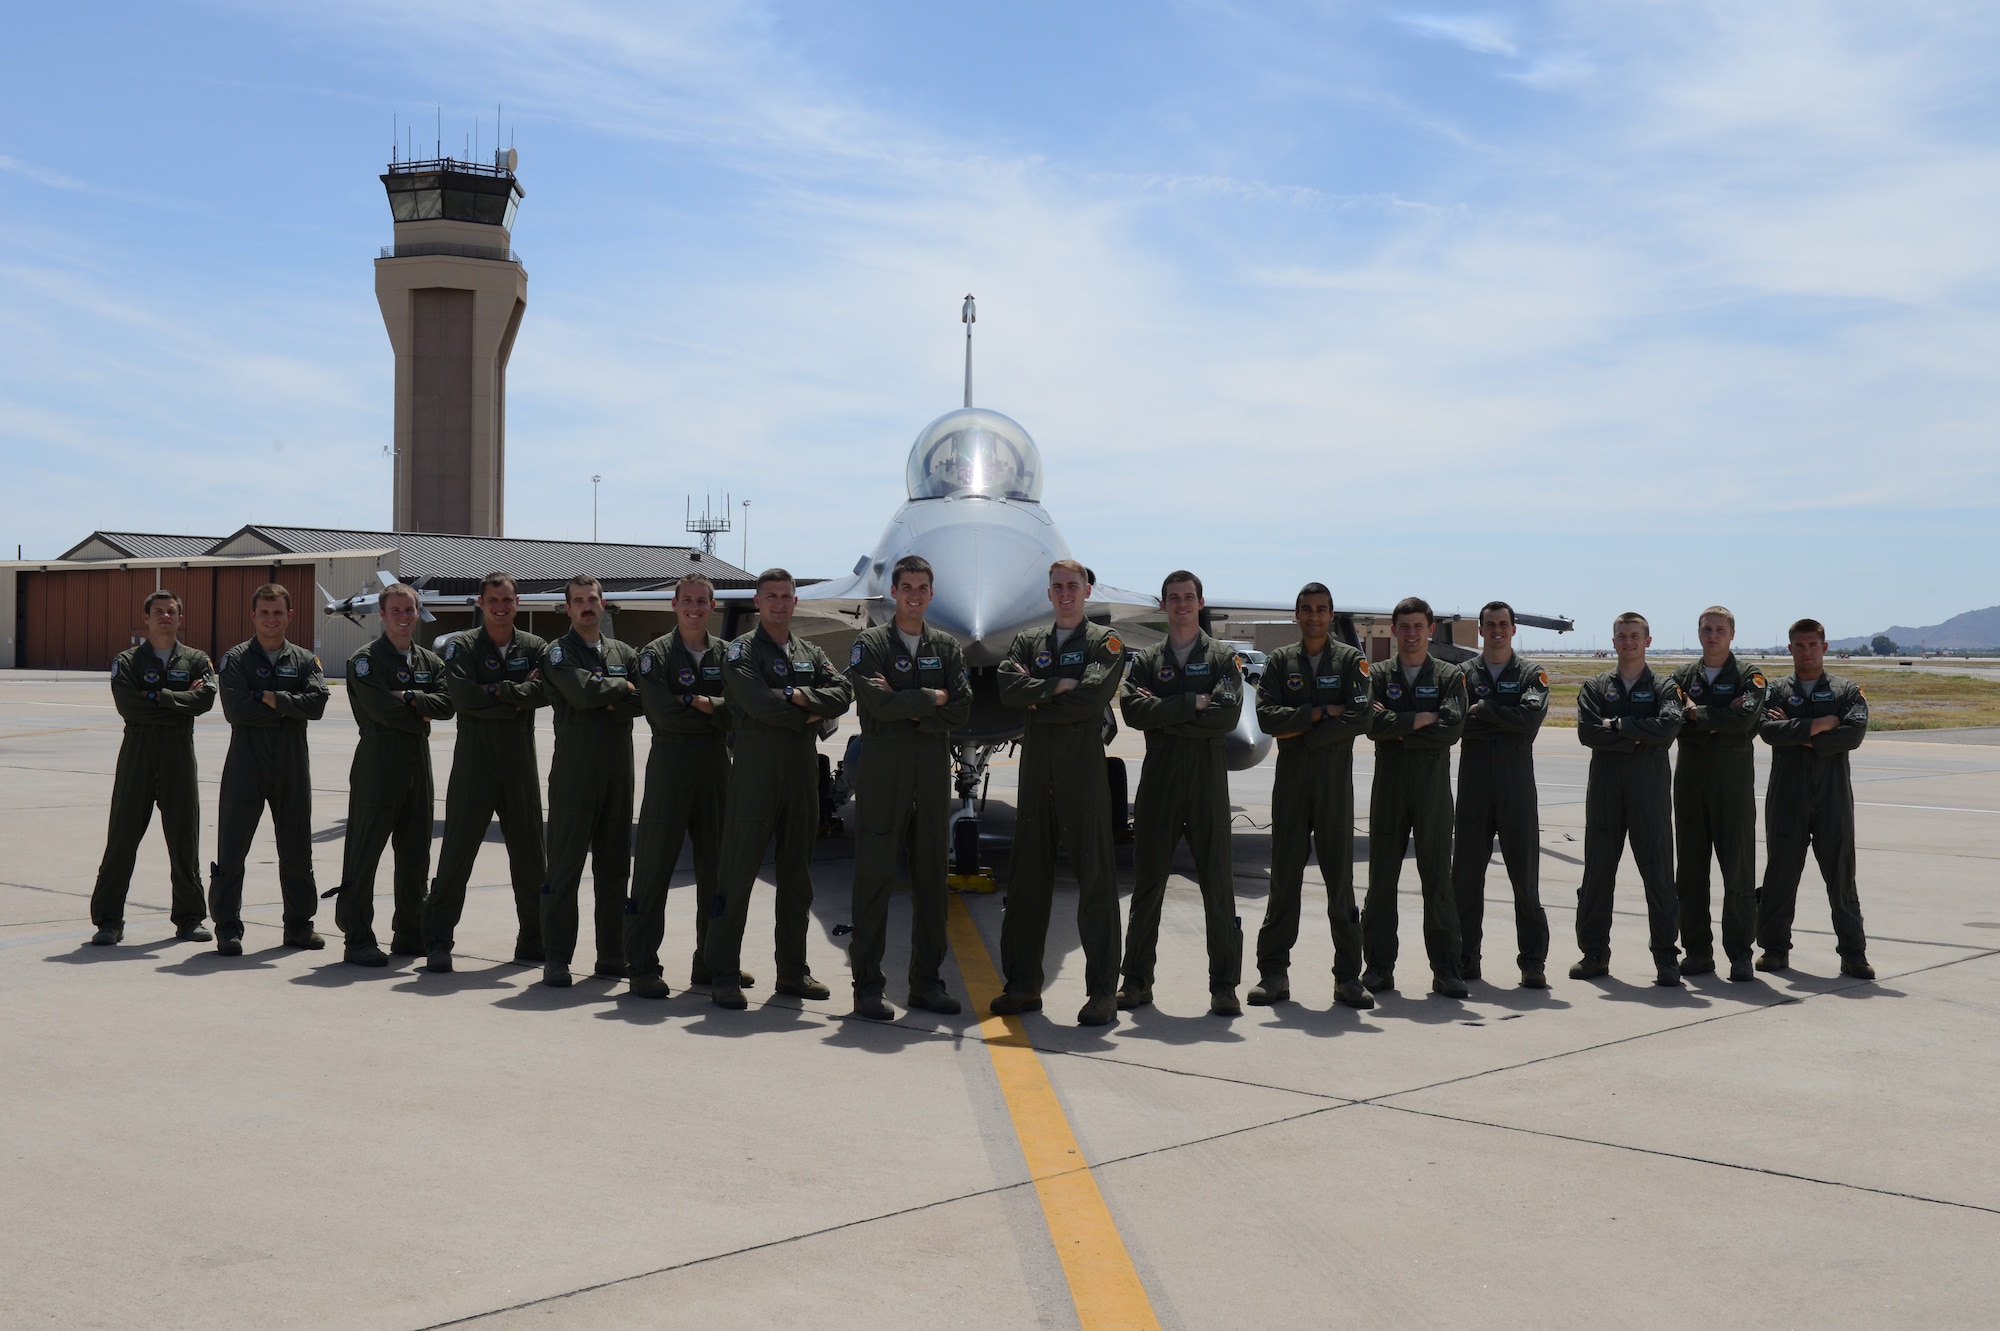 The 308th Fighter Squadron graduated 16 F-16 Fighting Falcon pilots June 12 from Class 14-EBG. It is the last class before standing down. They are, from left, 1st Lt. Tony Demma, Capt. Taylor Roach, 1st Lts. Matt Sanders, Dave Neville and Richard Olsen, Capts. Bryan Koenig and Kent North, 1st Lts. Harrison Gebs and Drew Clasen, Capt. Bradford Waldie, 1st Lts. Ravi Surdhar and Alexander Drummond, Capts. Tanner Lee and James Broncheau, 1st Lt. Ashton Lackey and Capt. Sky Villers. (Courtesy Photo)